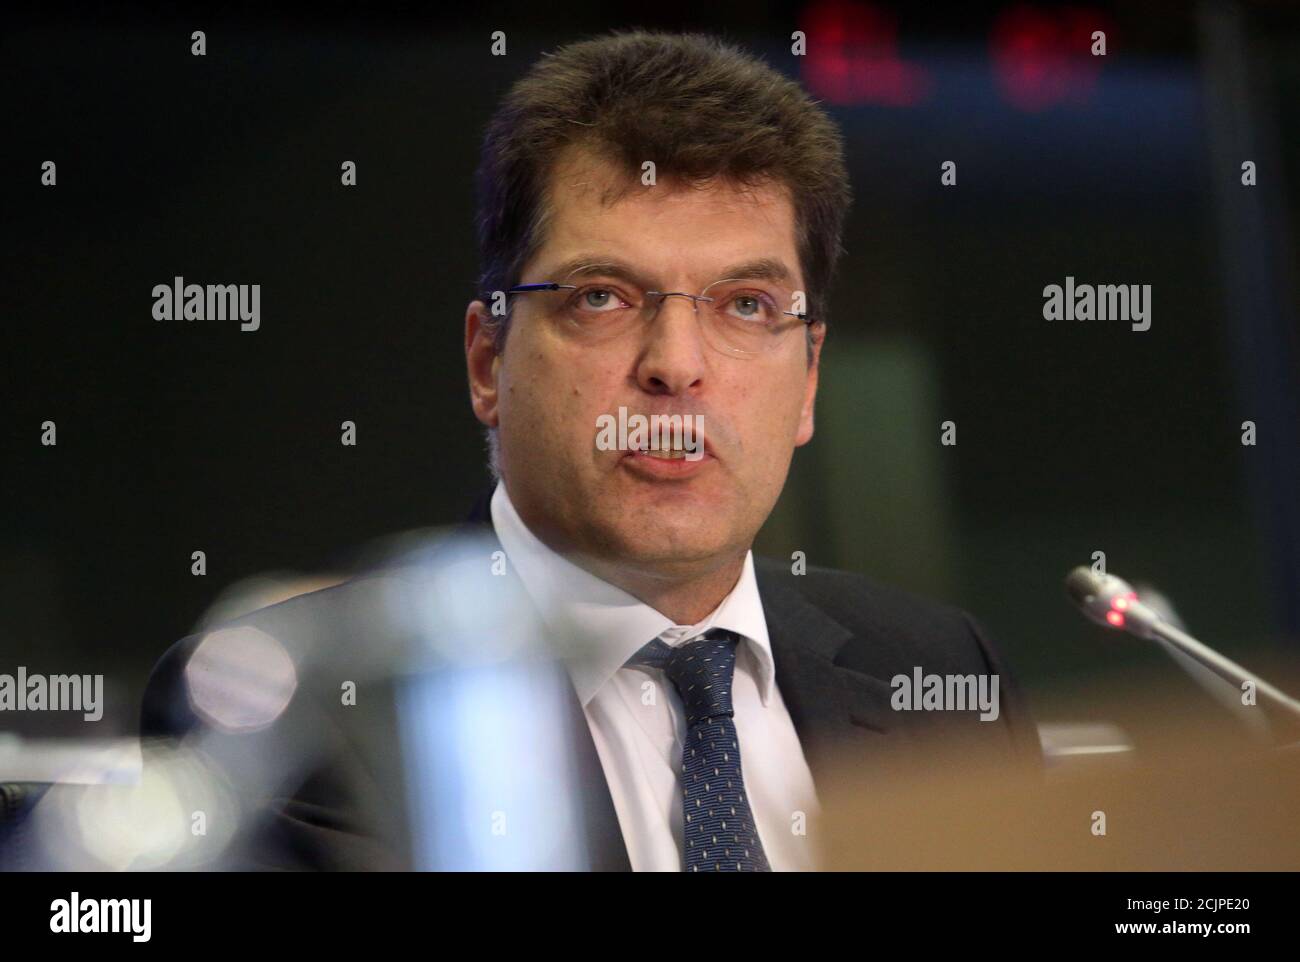 European Crisis Management Commissioner-designate Janez Lenarcic of Slovenia attends his hearing before the European Parliament in Brussels, Belgium October 2, 2019. REUTERS/Francois Walschaerts Stock Photo